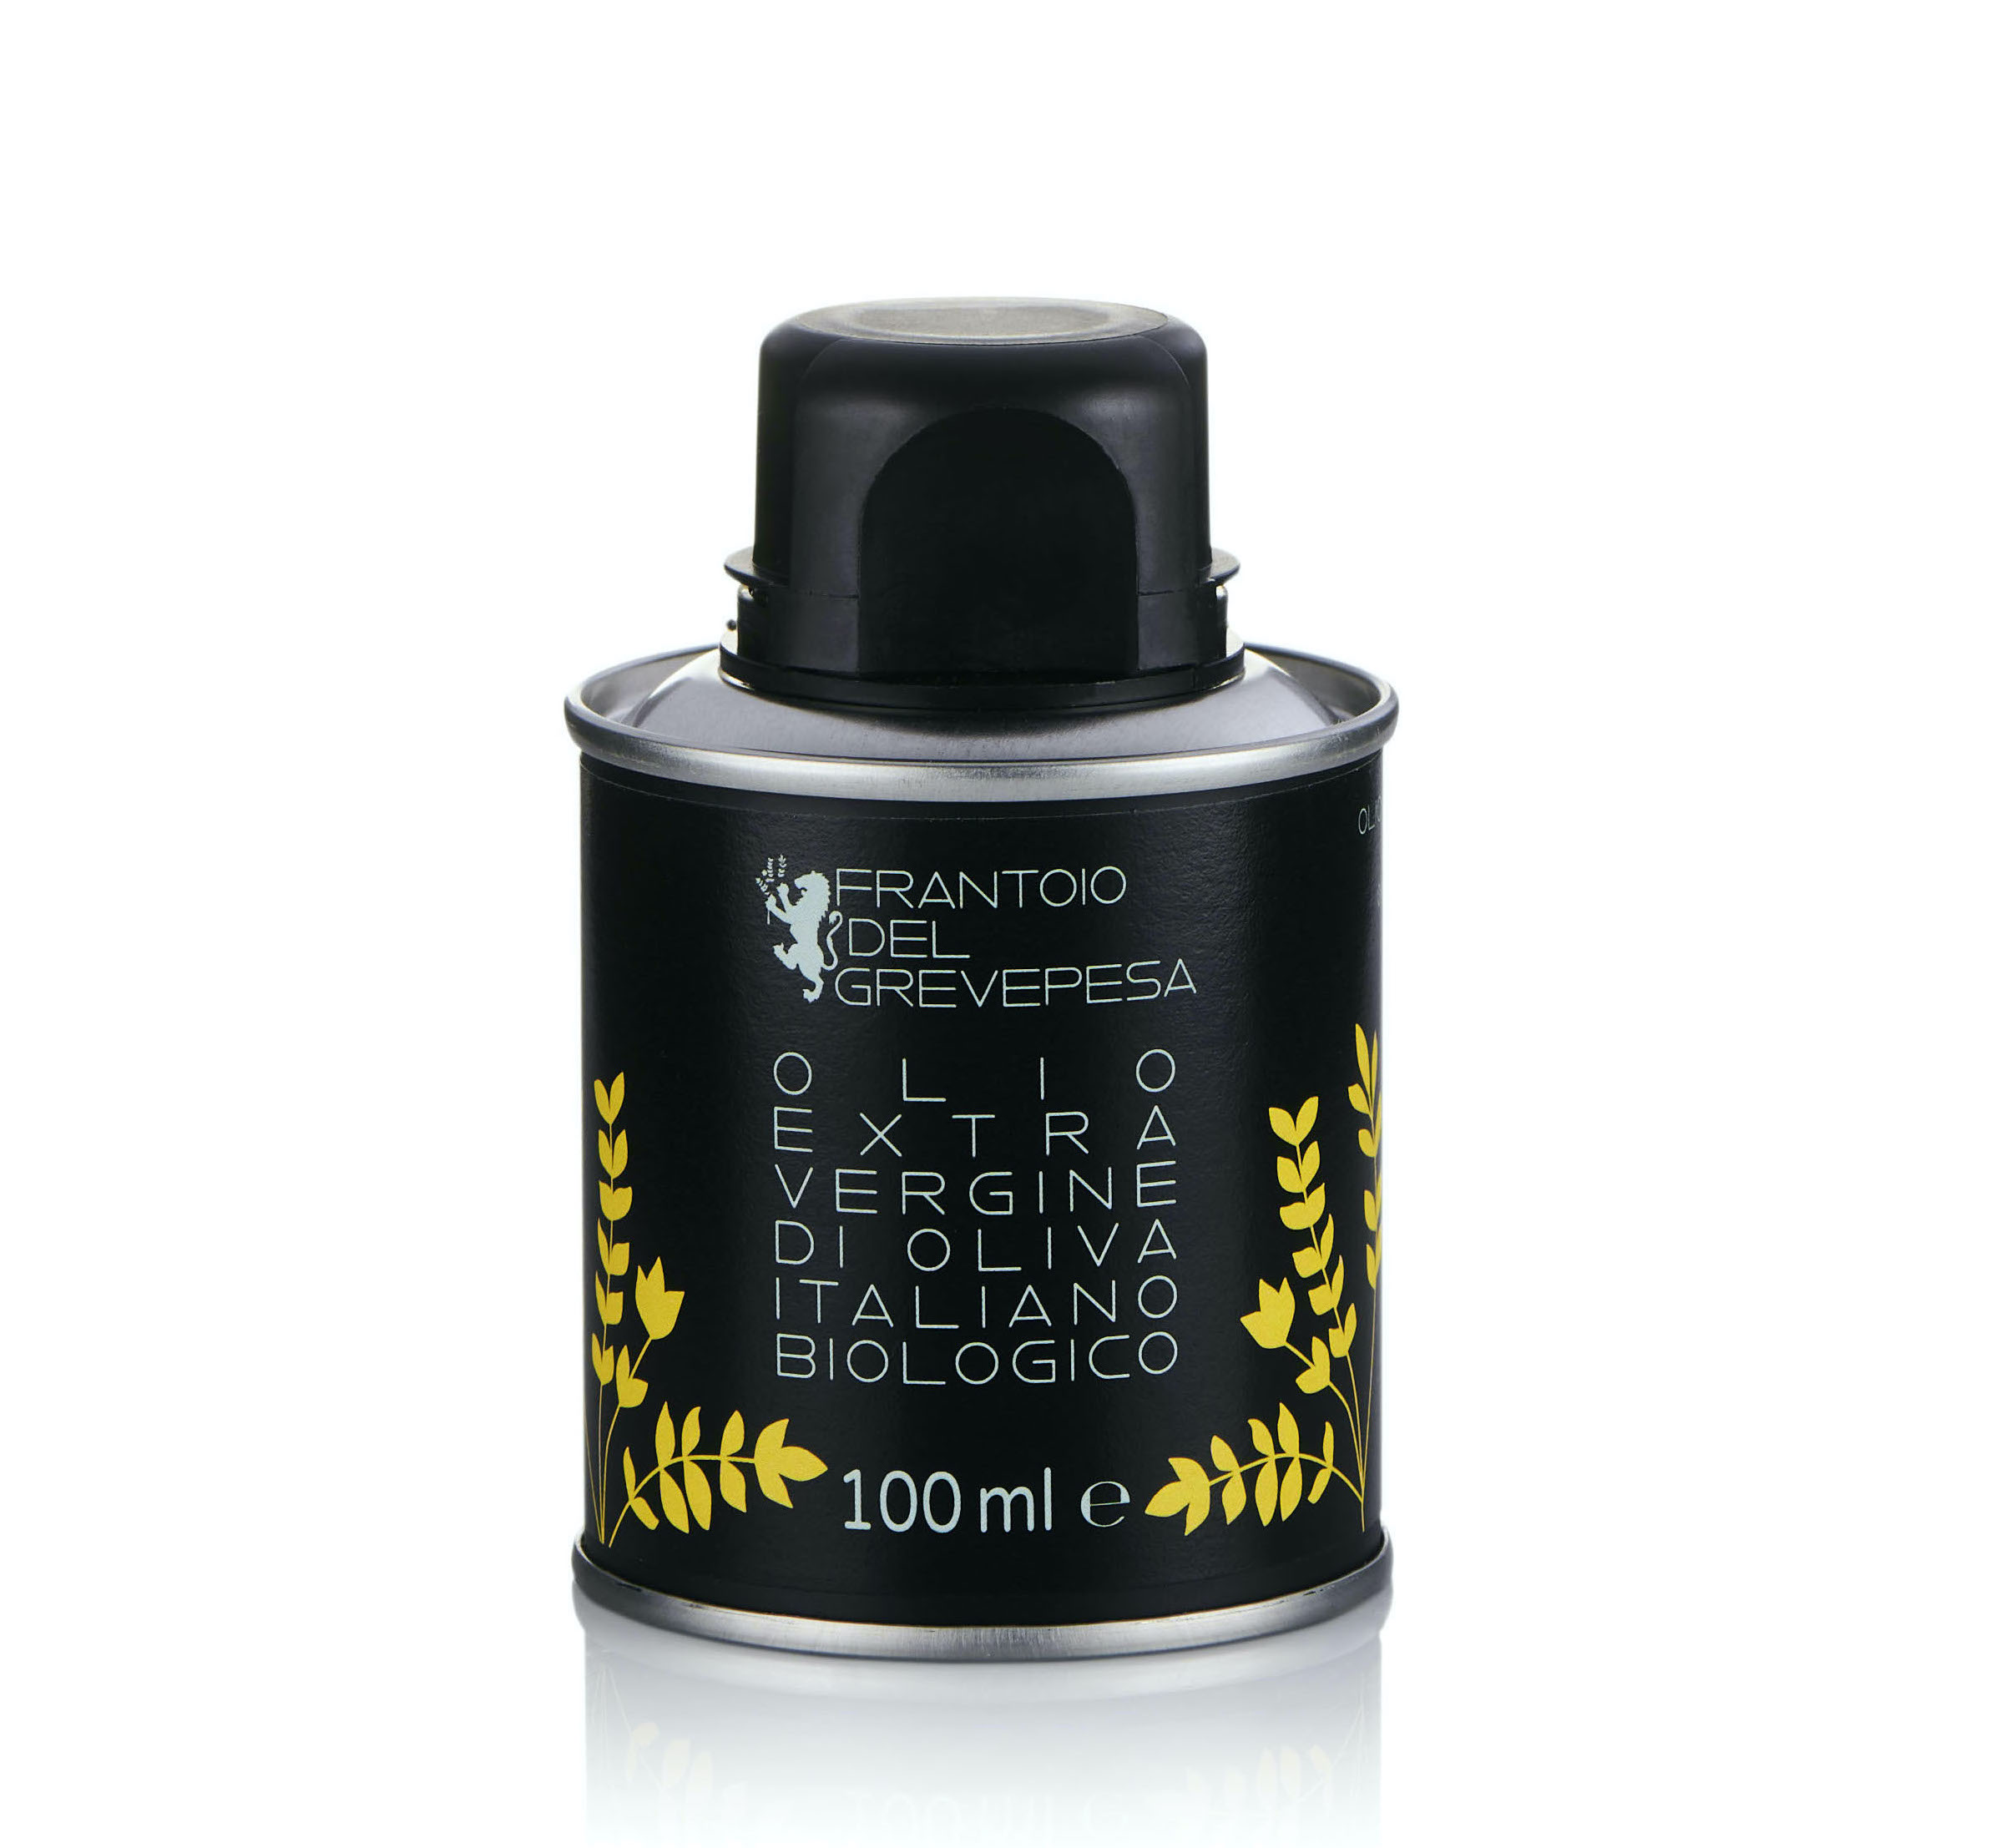 In the race pack a can of extra virgin olive oil produced by Frantoio del Grevepesa for ultratrail and trail runners